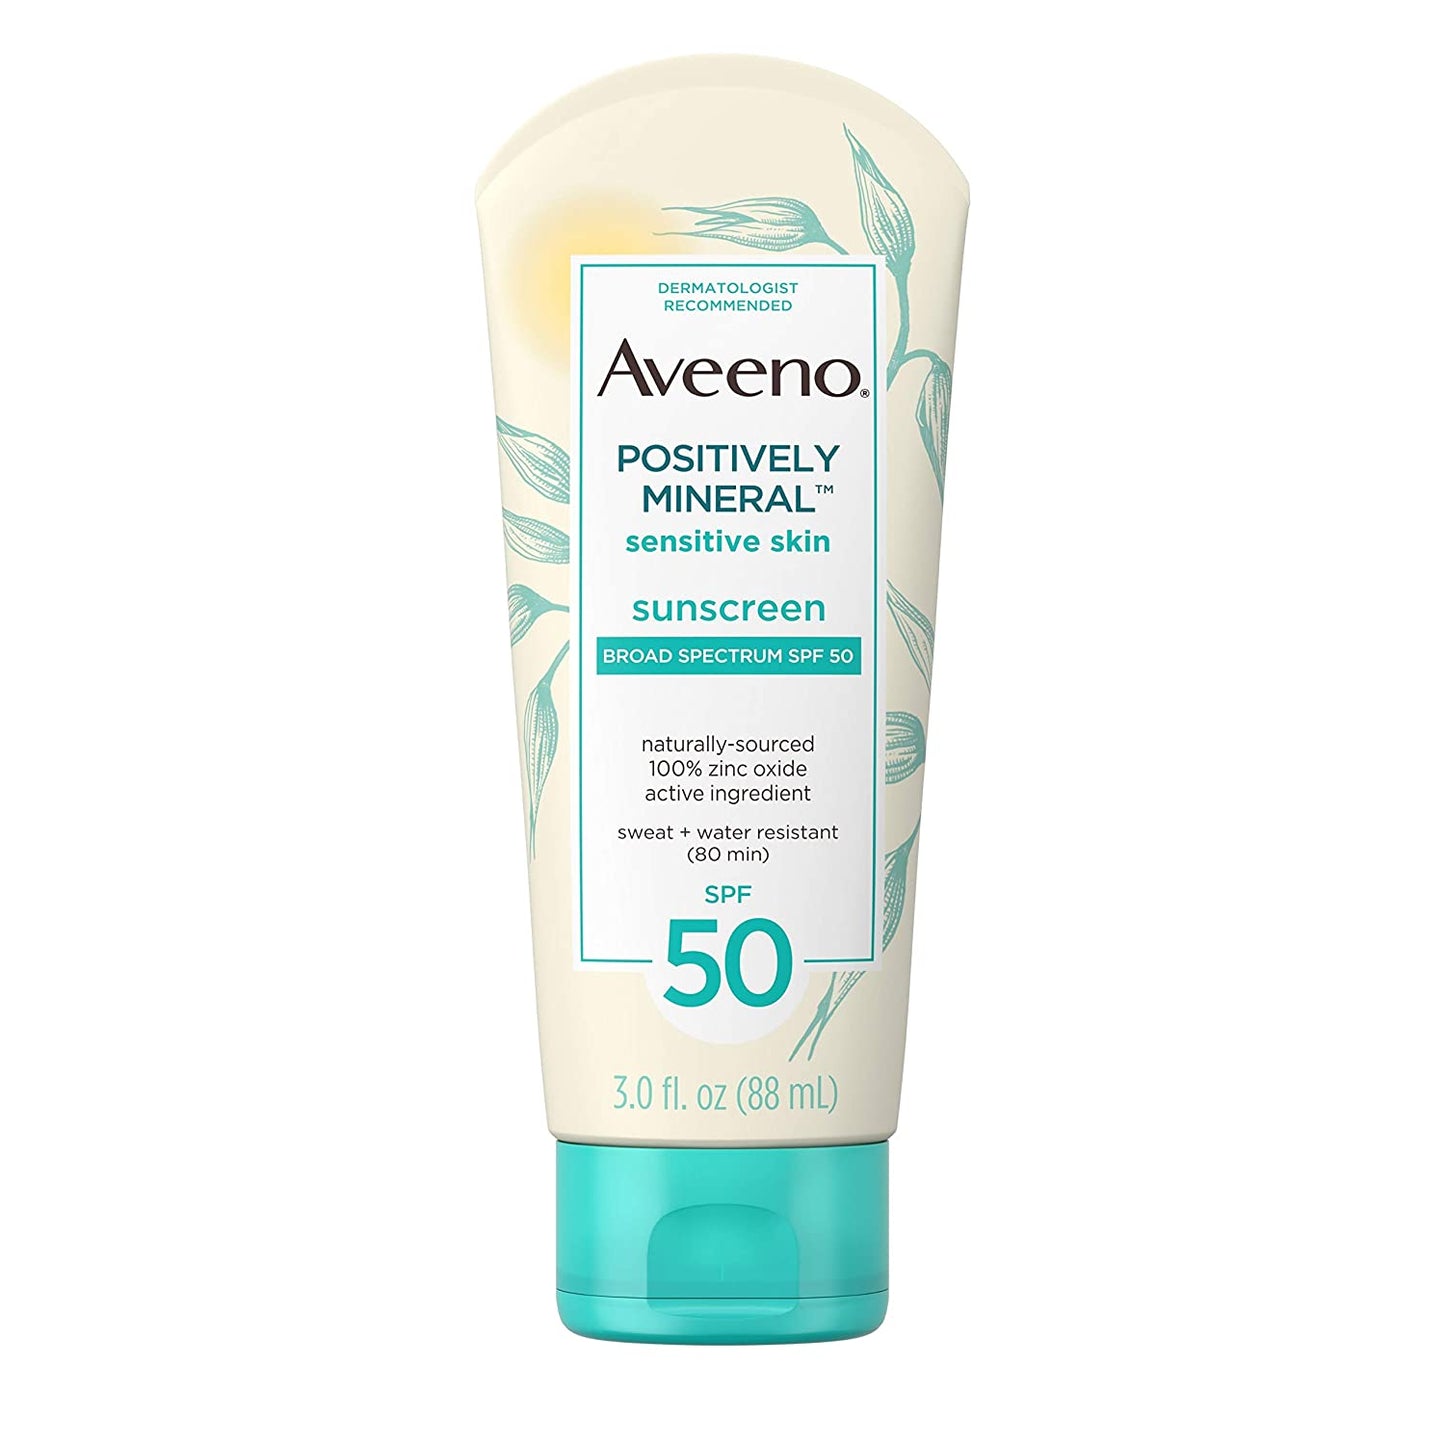 Aveeno Positively Mineral Sensitive Skin Daily Sunscreen Lotion for Face, Broad Spectrum SPF 50, 88 ml